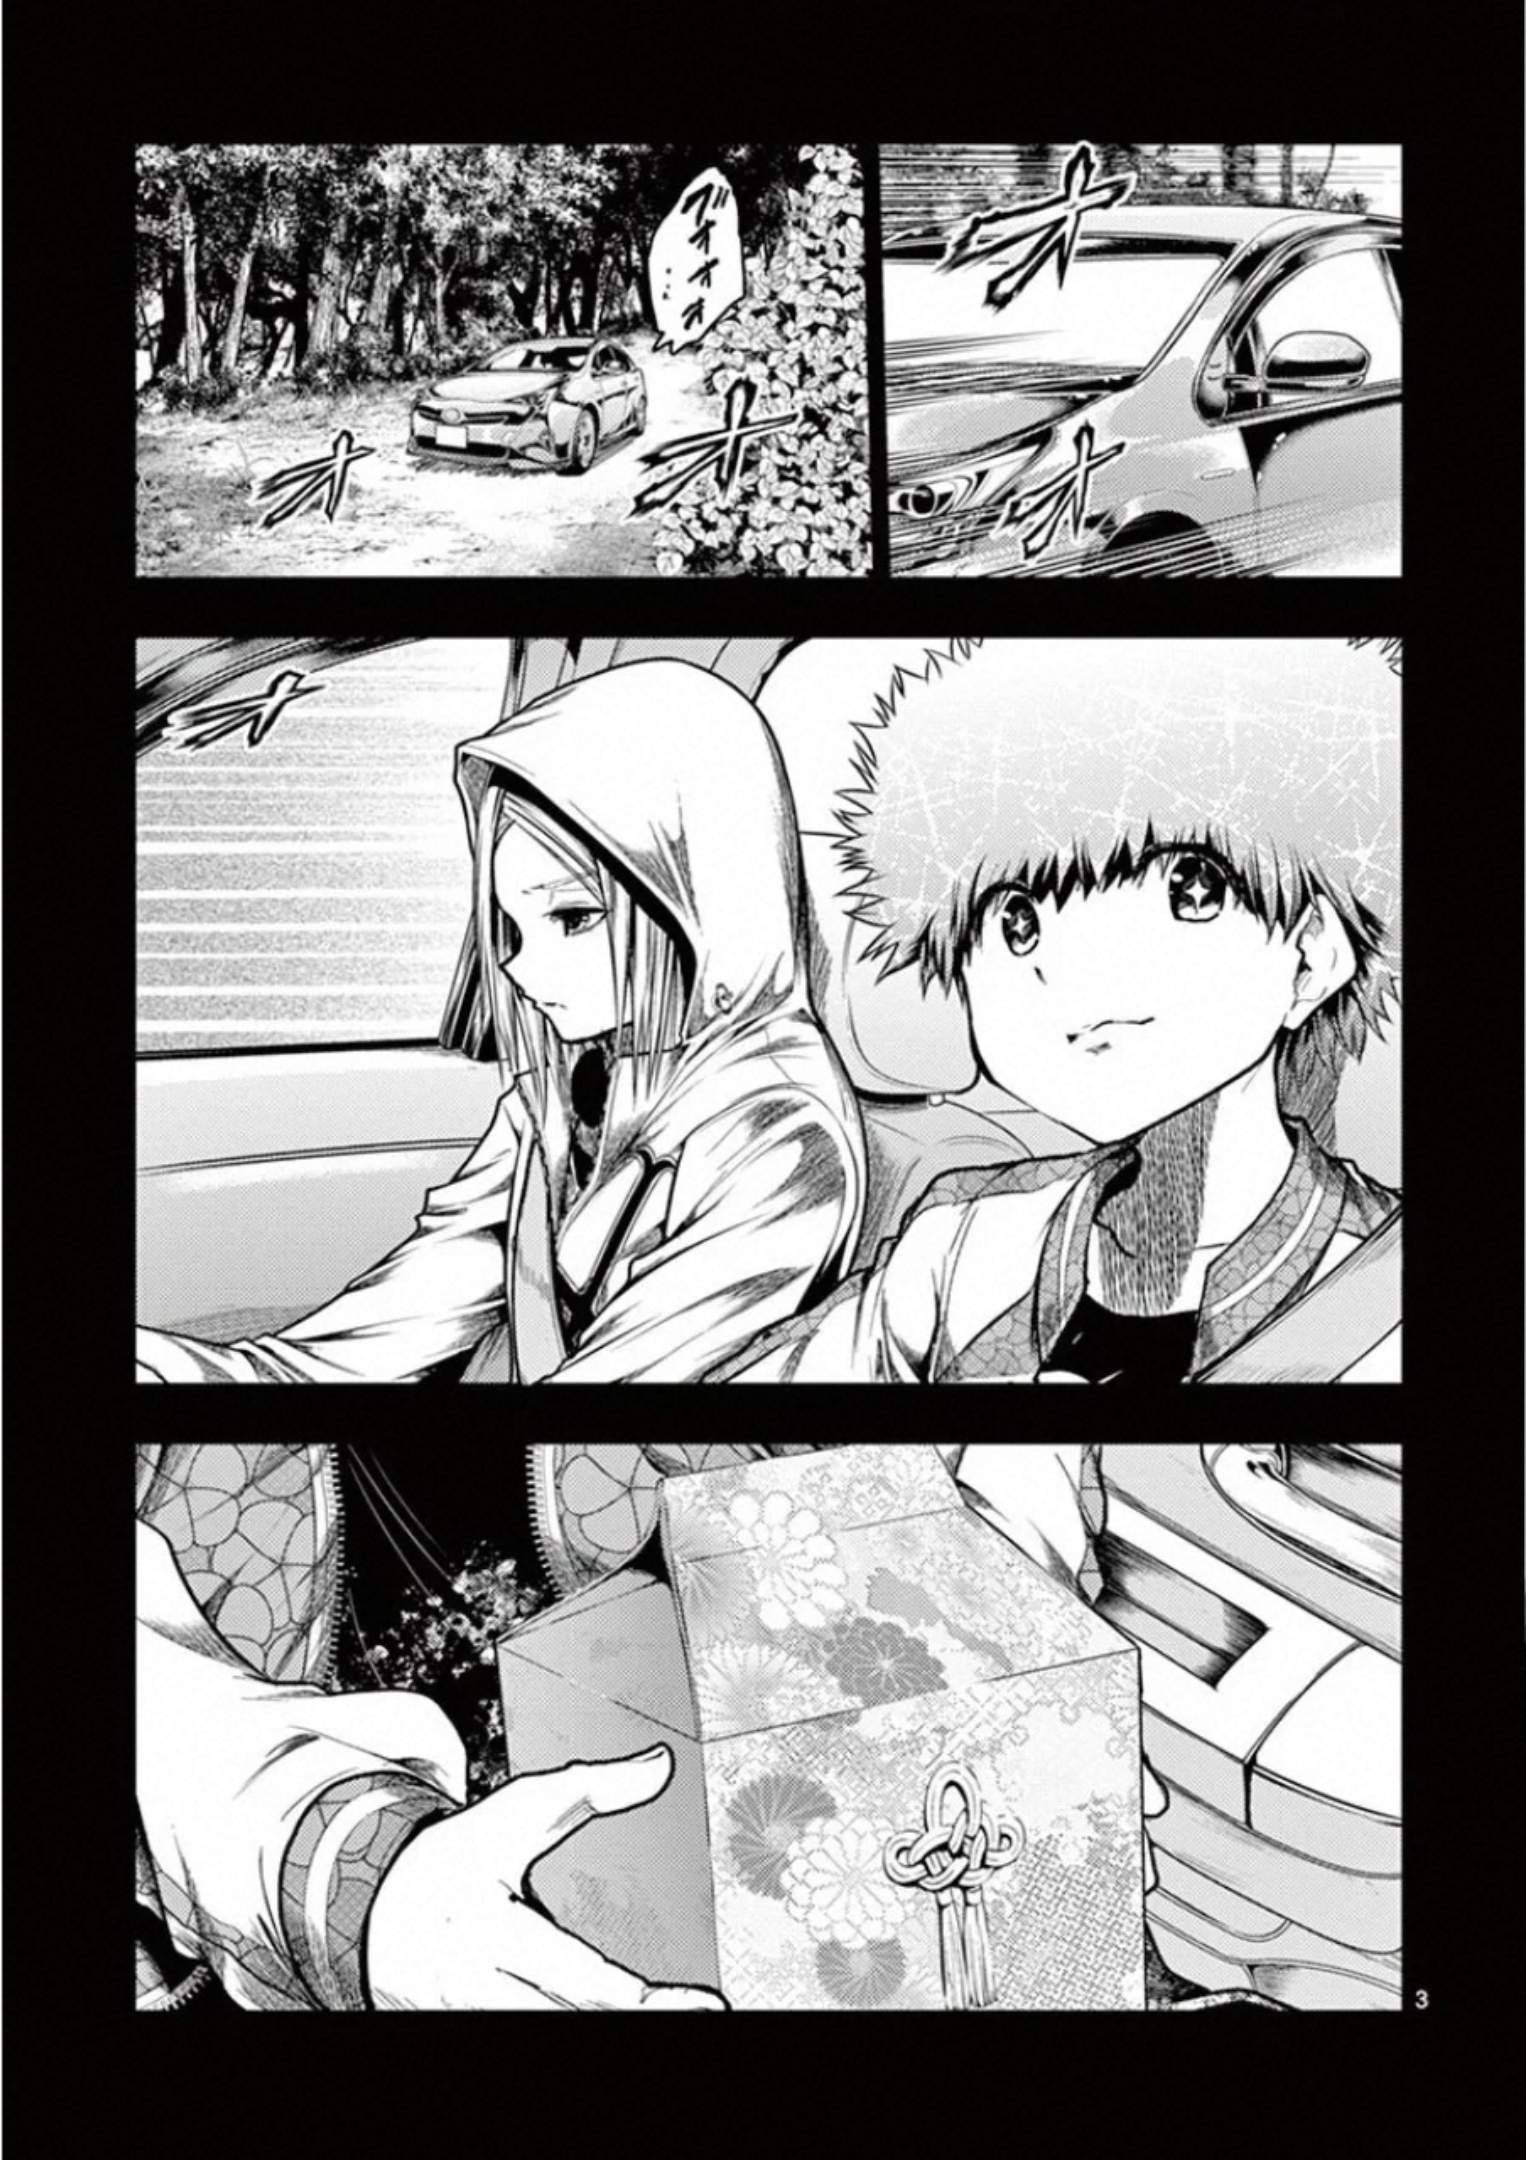 Start Fighting 5 Seconds After Meeting - chapter 120 - #3